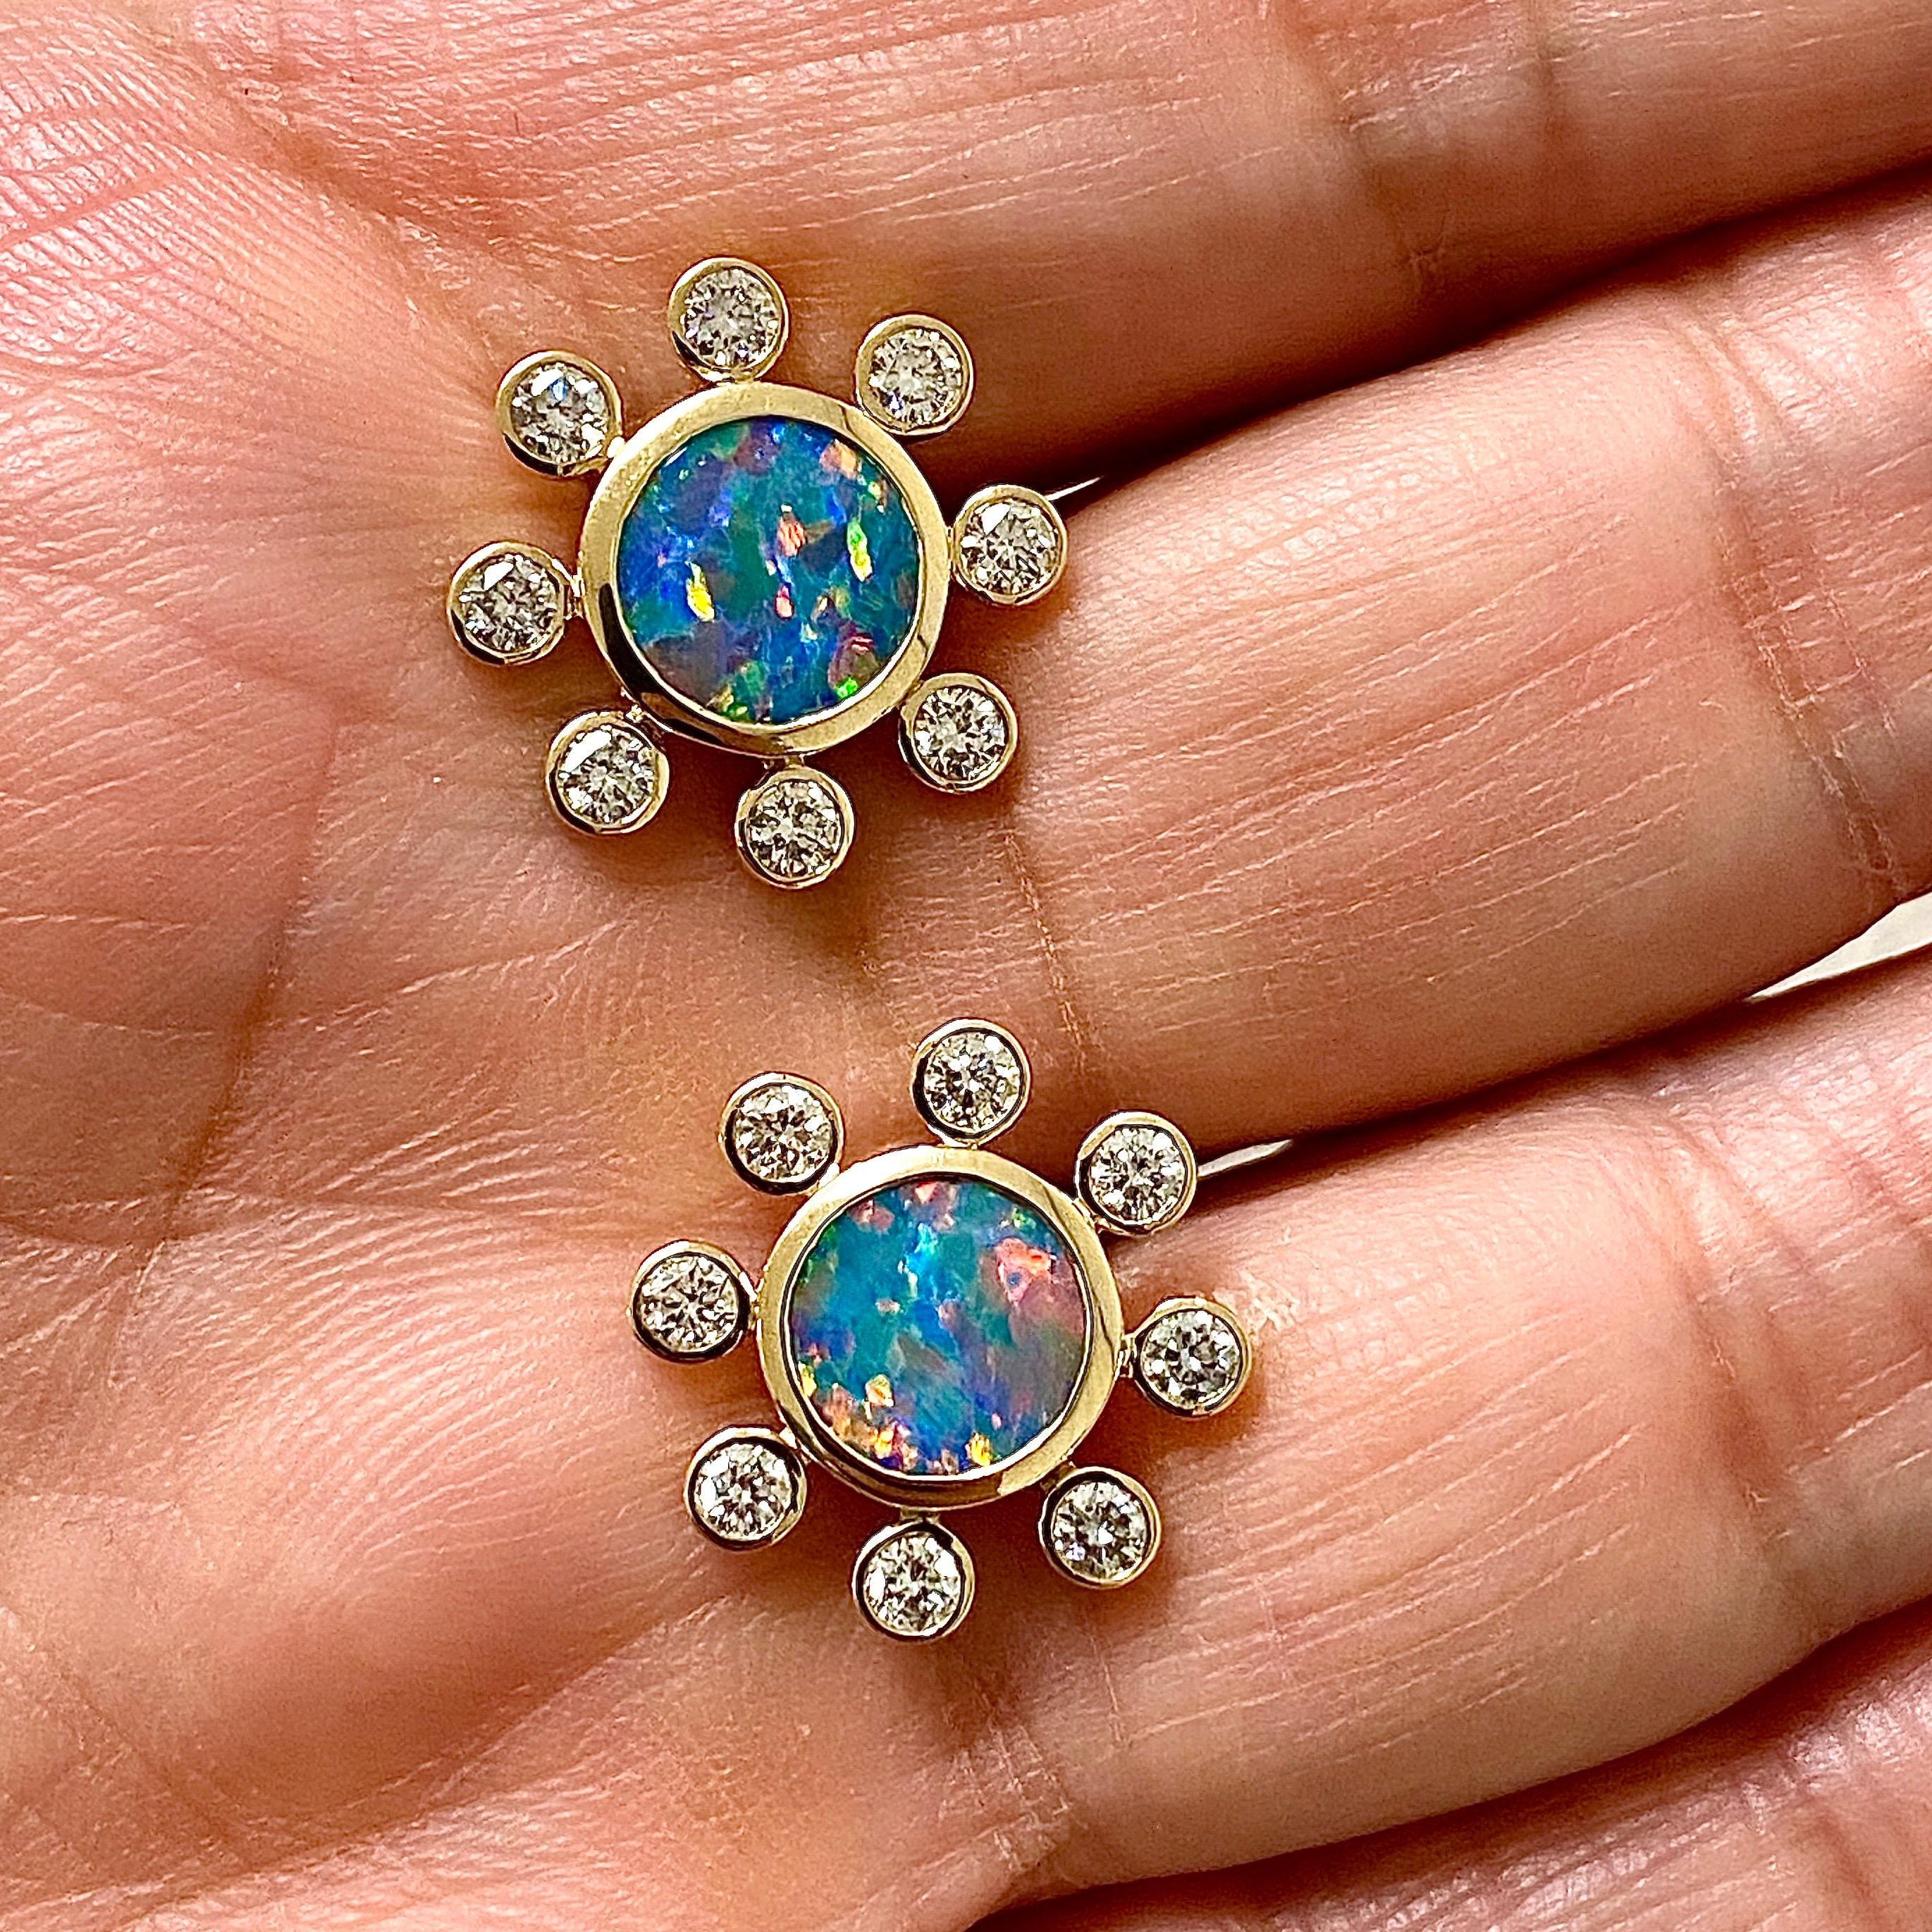 Created in 18kyg
Australian boulder opals 2.5 cts approx
Champagne diamonds 0.90 ct approx
Limited edition

About the Designers

Drawing inspiration from little things, Dharmesh & Namrata Kothari have created an extraordinary and refreshing